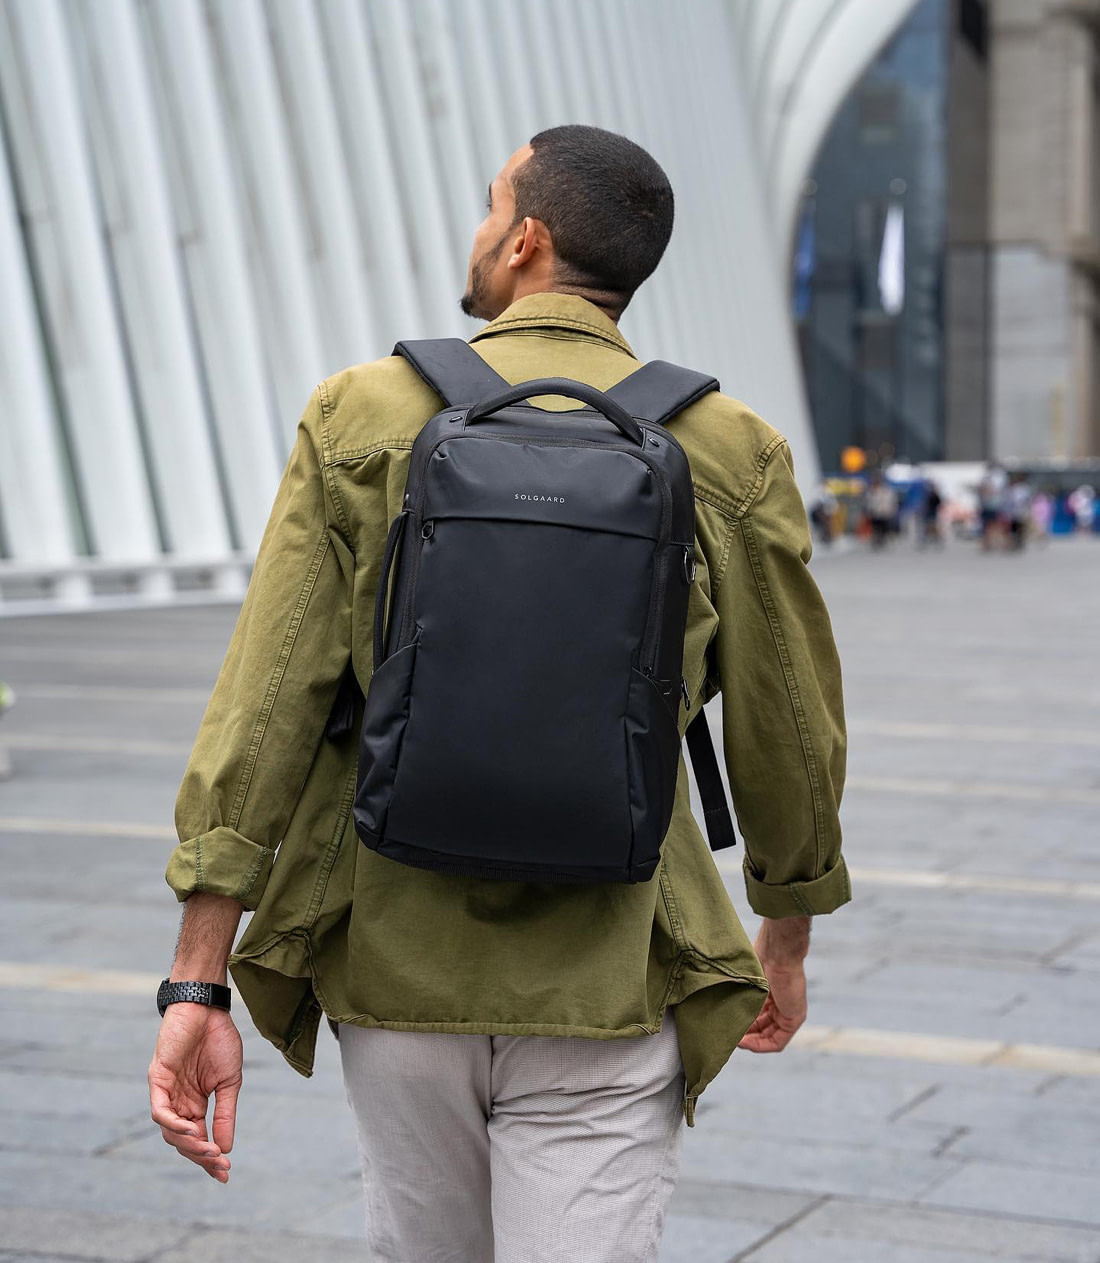 The Best Carry-On Backpacks to Take on Your Next Flight